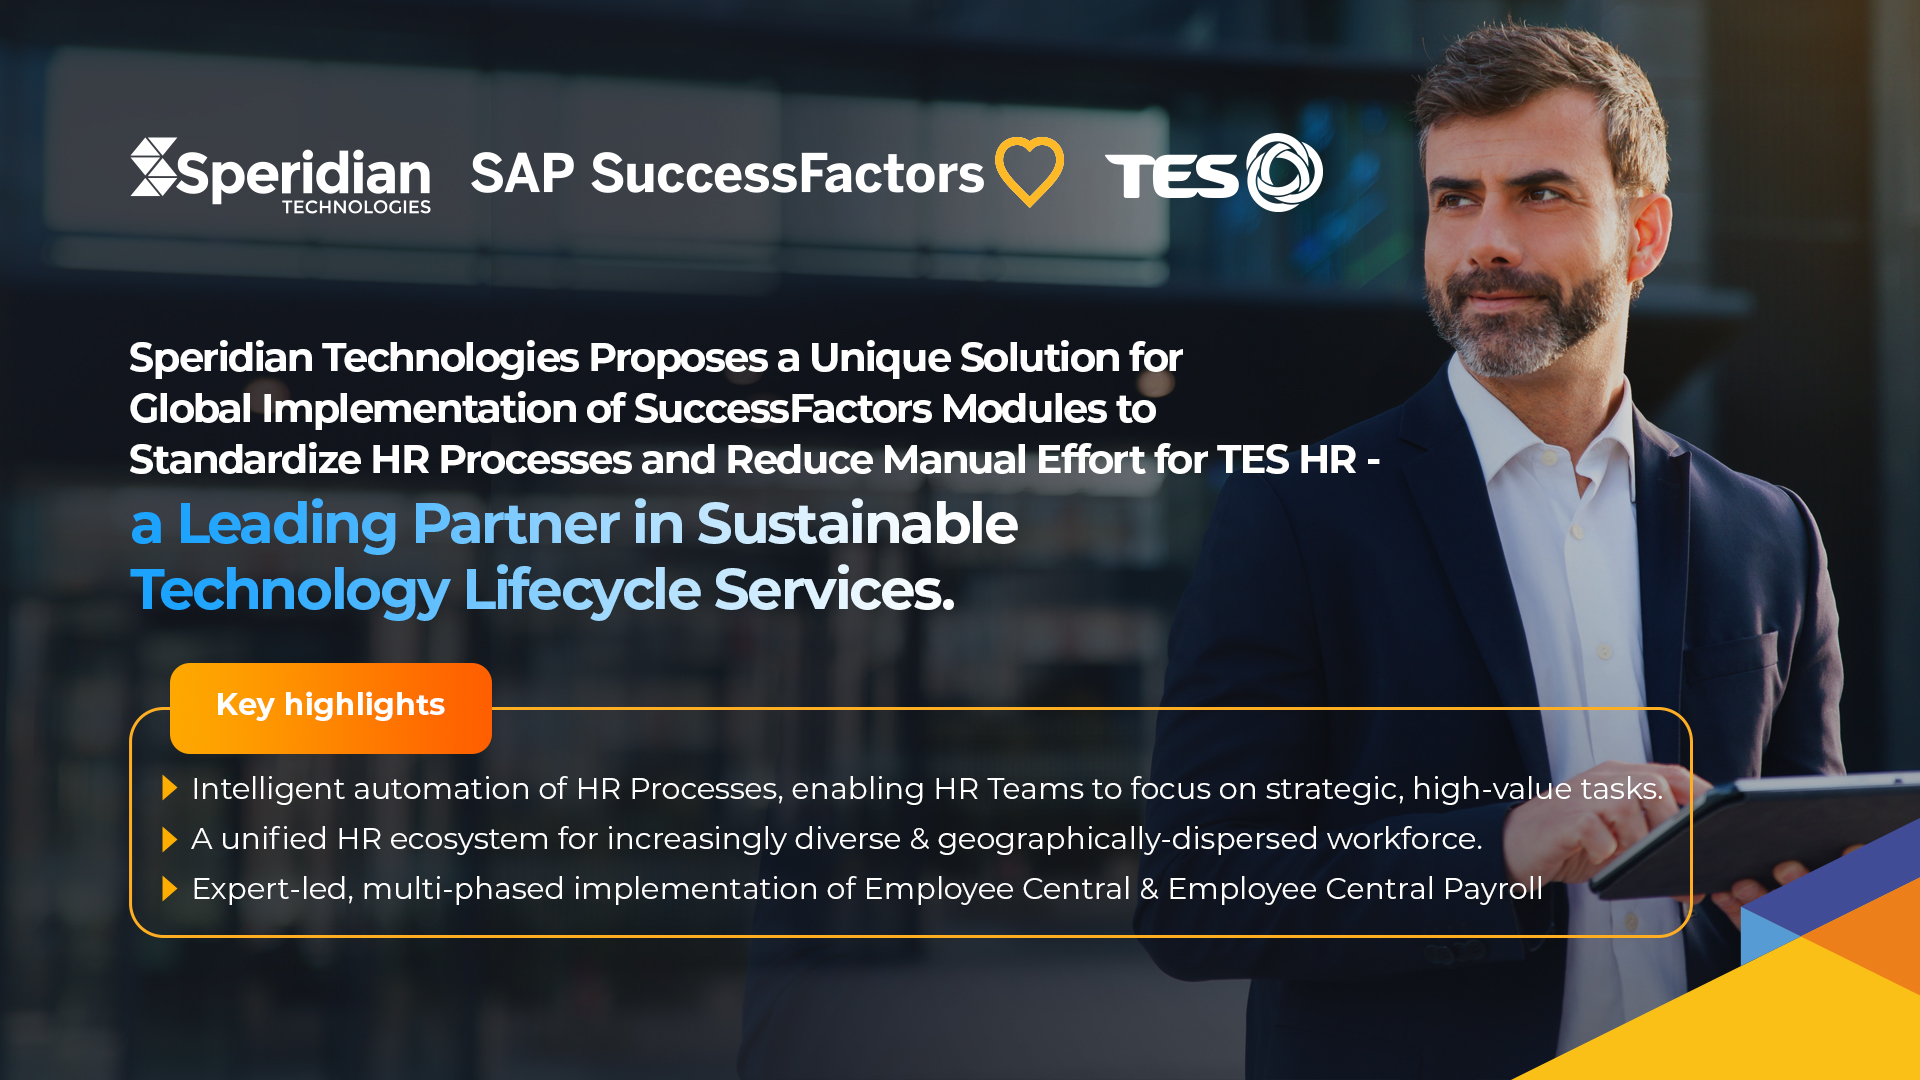 Speridian Technologies Proposes a Unique Solution for Global Implementation of SuccessFactors Modules to Standardize HR Processes and Reduce Manual Effort for TES HR – a Leading Partner in Sustainable Technology Lifecycle Services